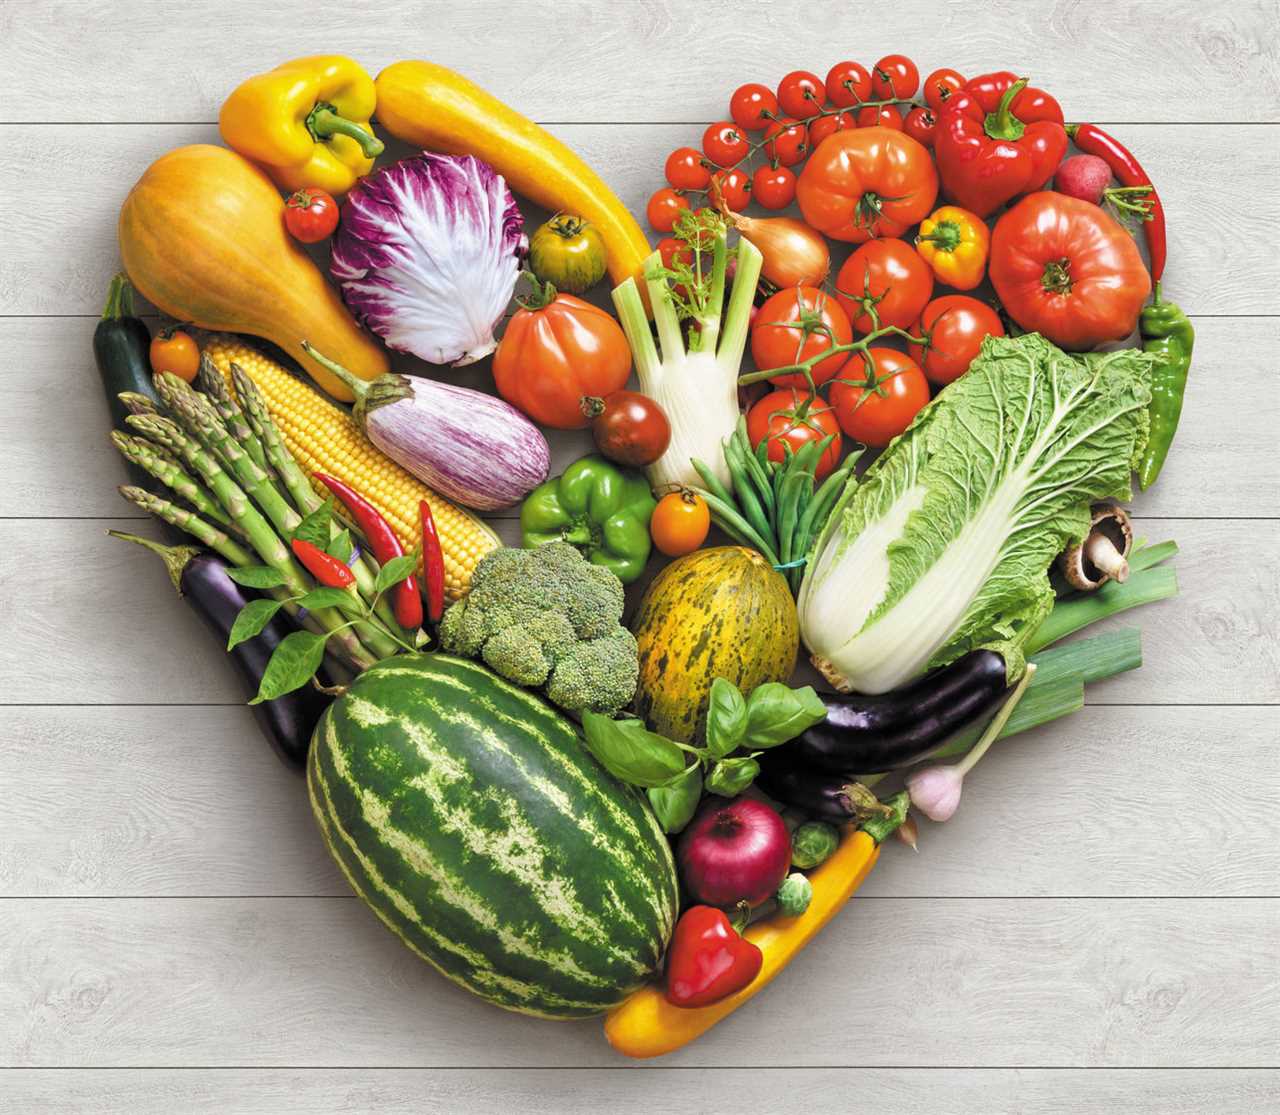 Plant-Based Diets For Reducing the Risk of Thrombosis